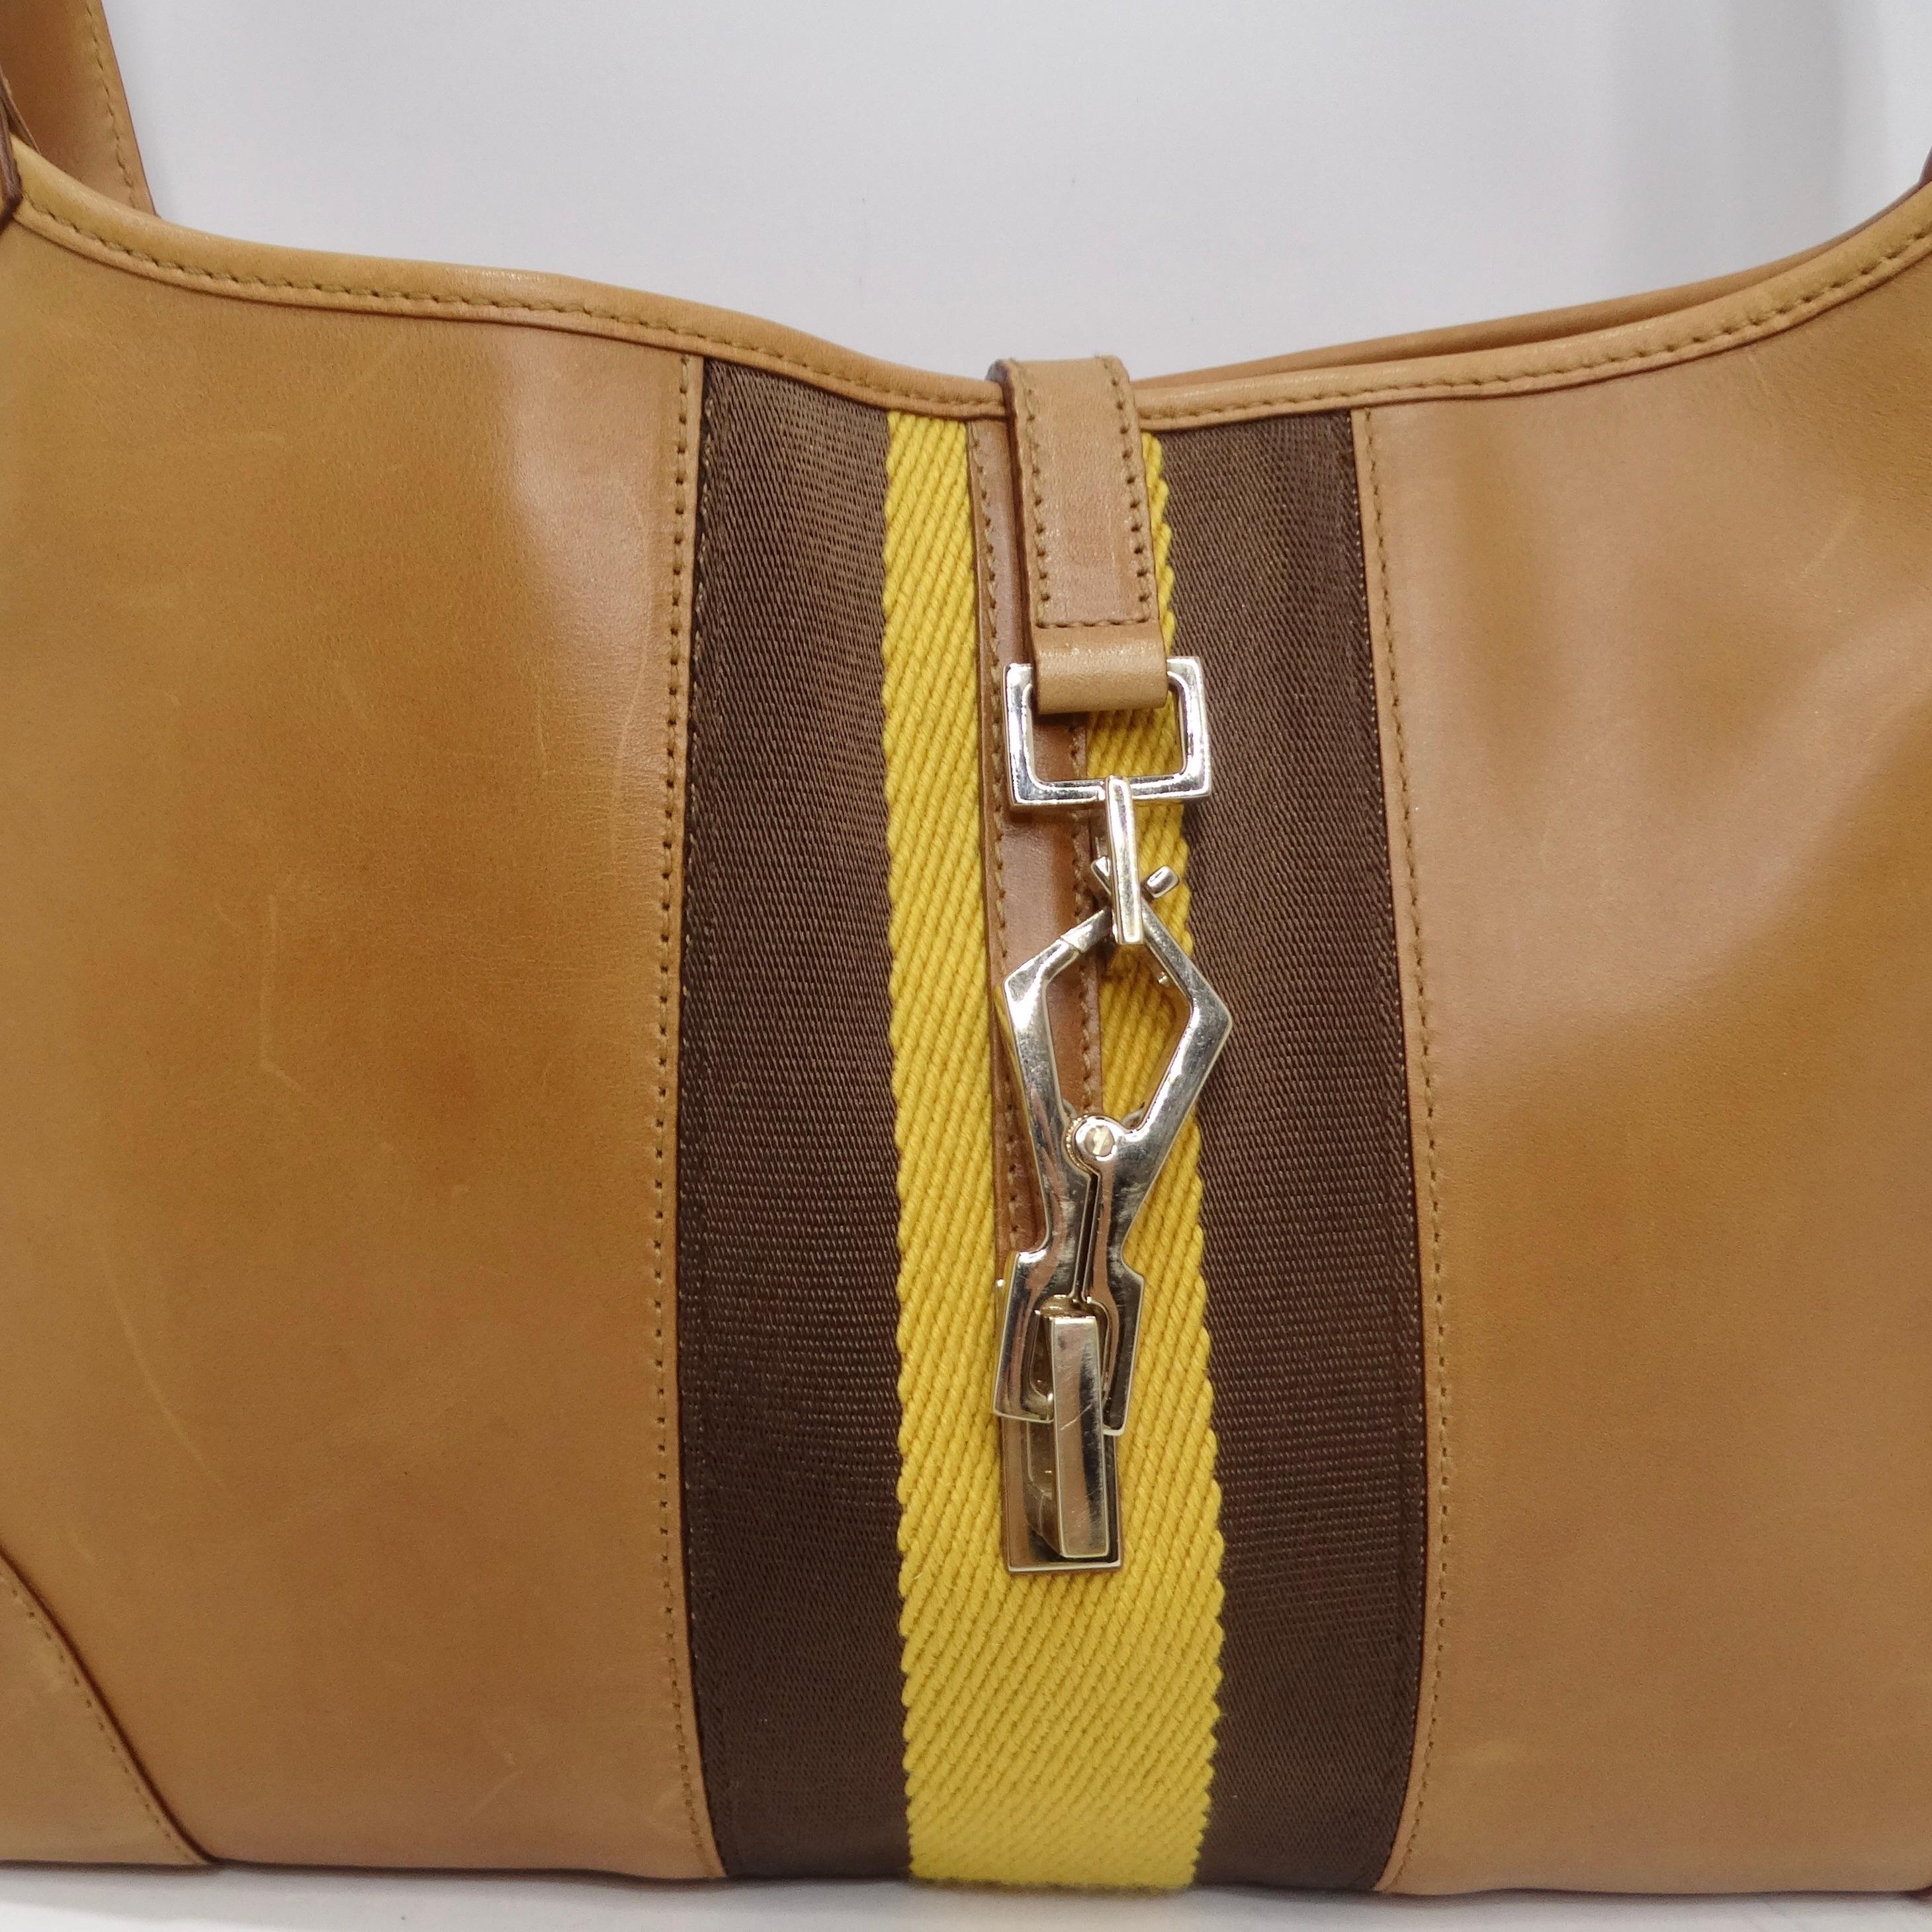 Introducing a handbag that's not just an accessory but a symbol of iconic fashion - the Gucci by Tom Ford Jackie Brown Leather Handbag. This hobo shoulder bag showcases the classic Jackie style in soft camel brown leather, adorned with Gucci stripes